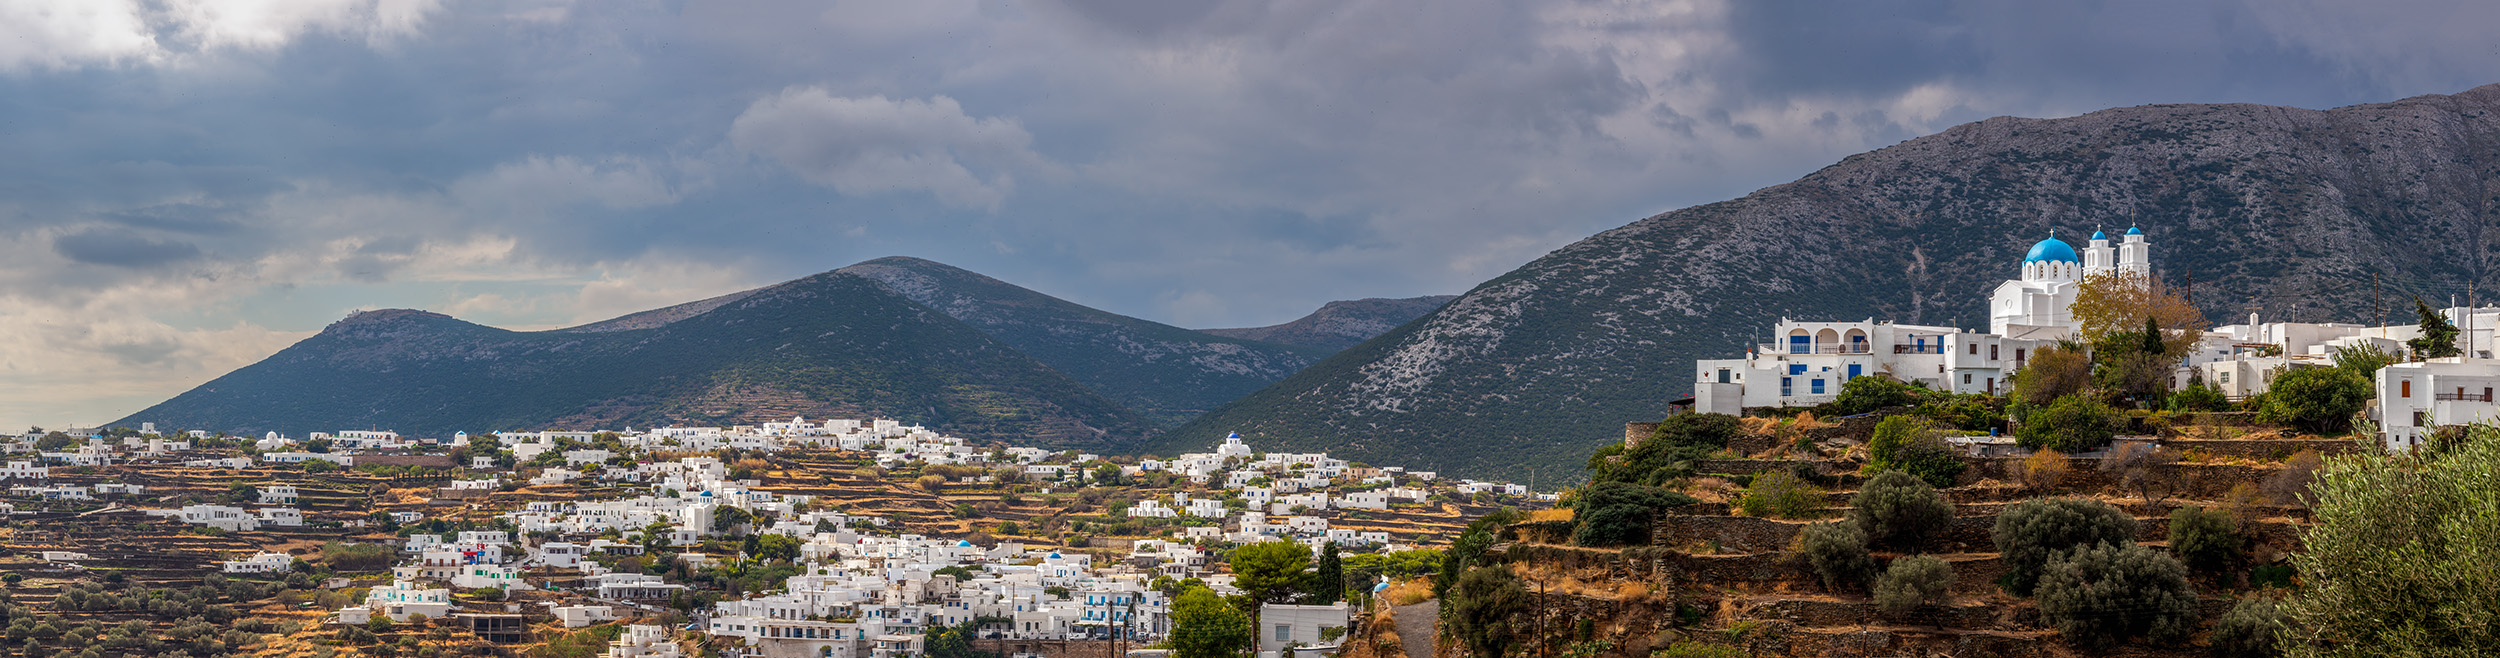 Nestled amidst the Cycladic islands, Apollonia in Sifnos, Greece, is a town steeped in history and charm. From a commanding viewpoint...